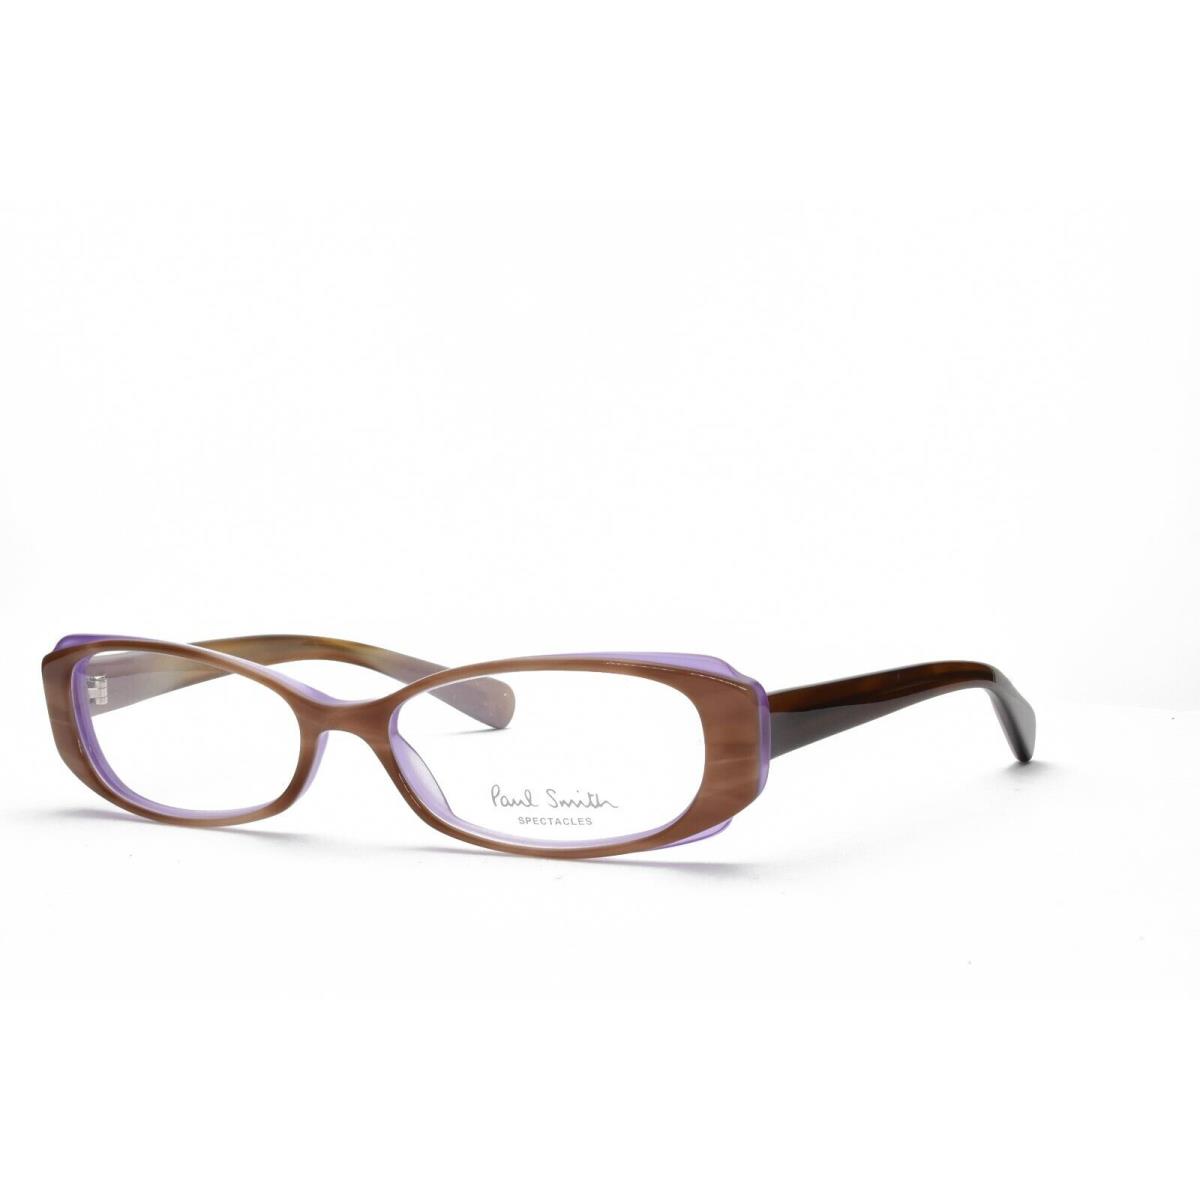 Paul Smith PS 405 Syclv Eyeglasses Frames Only 51-16-138